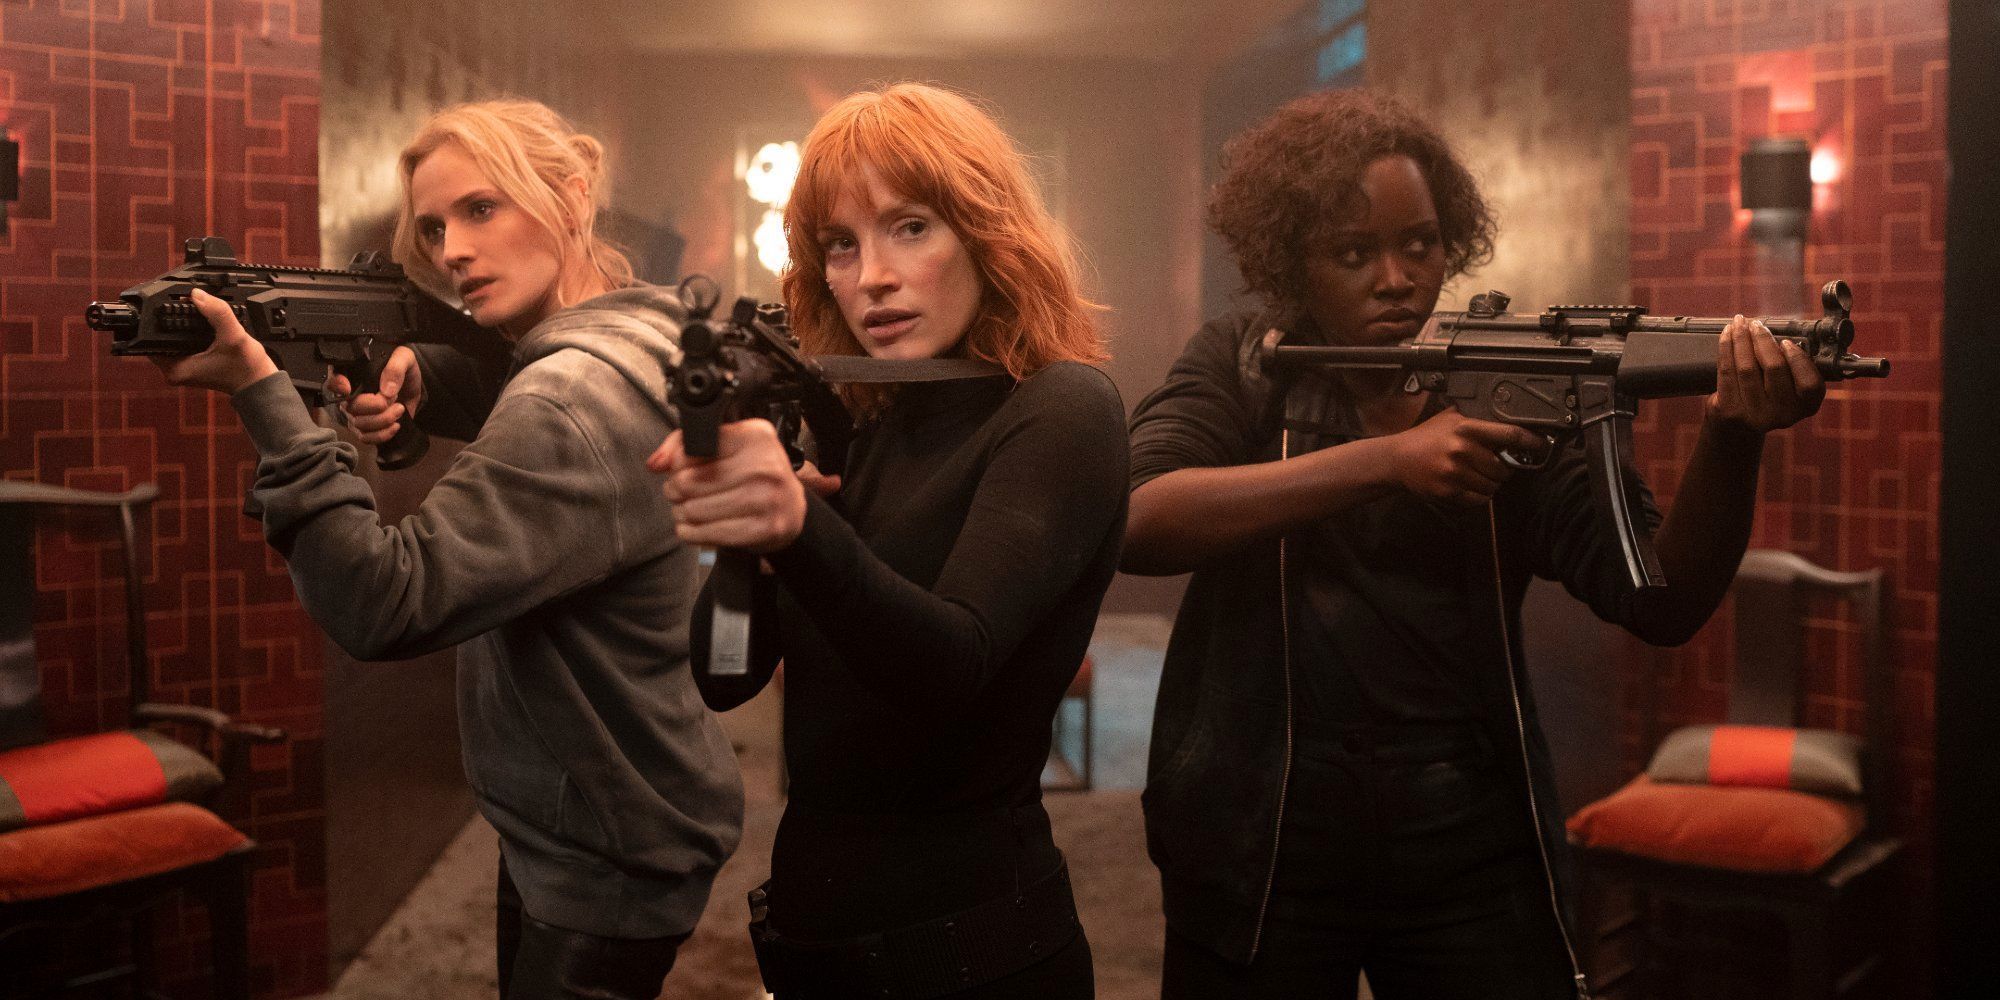 Diane Kruger, Jessica Chastain, and Lupita Nyong'o wielding machineguns